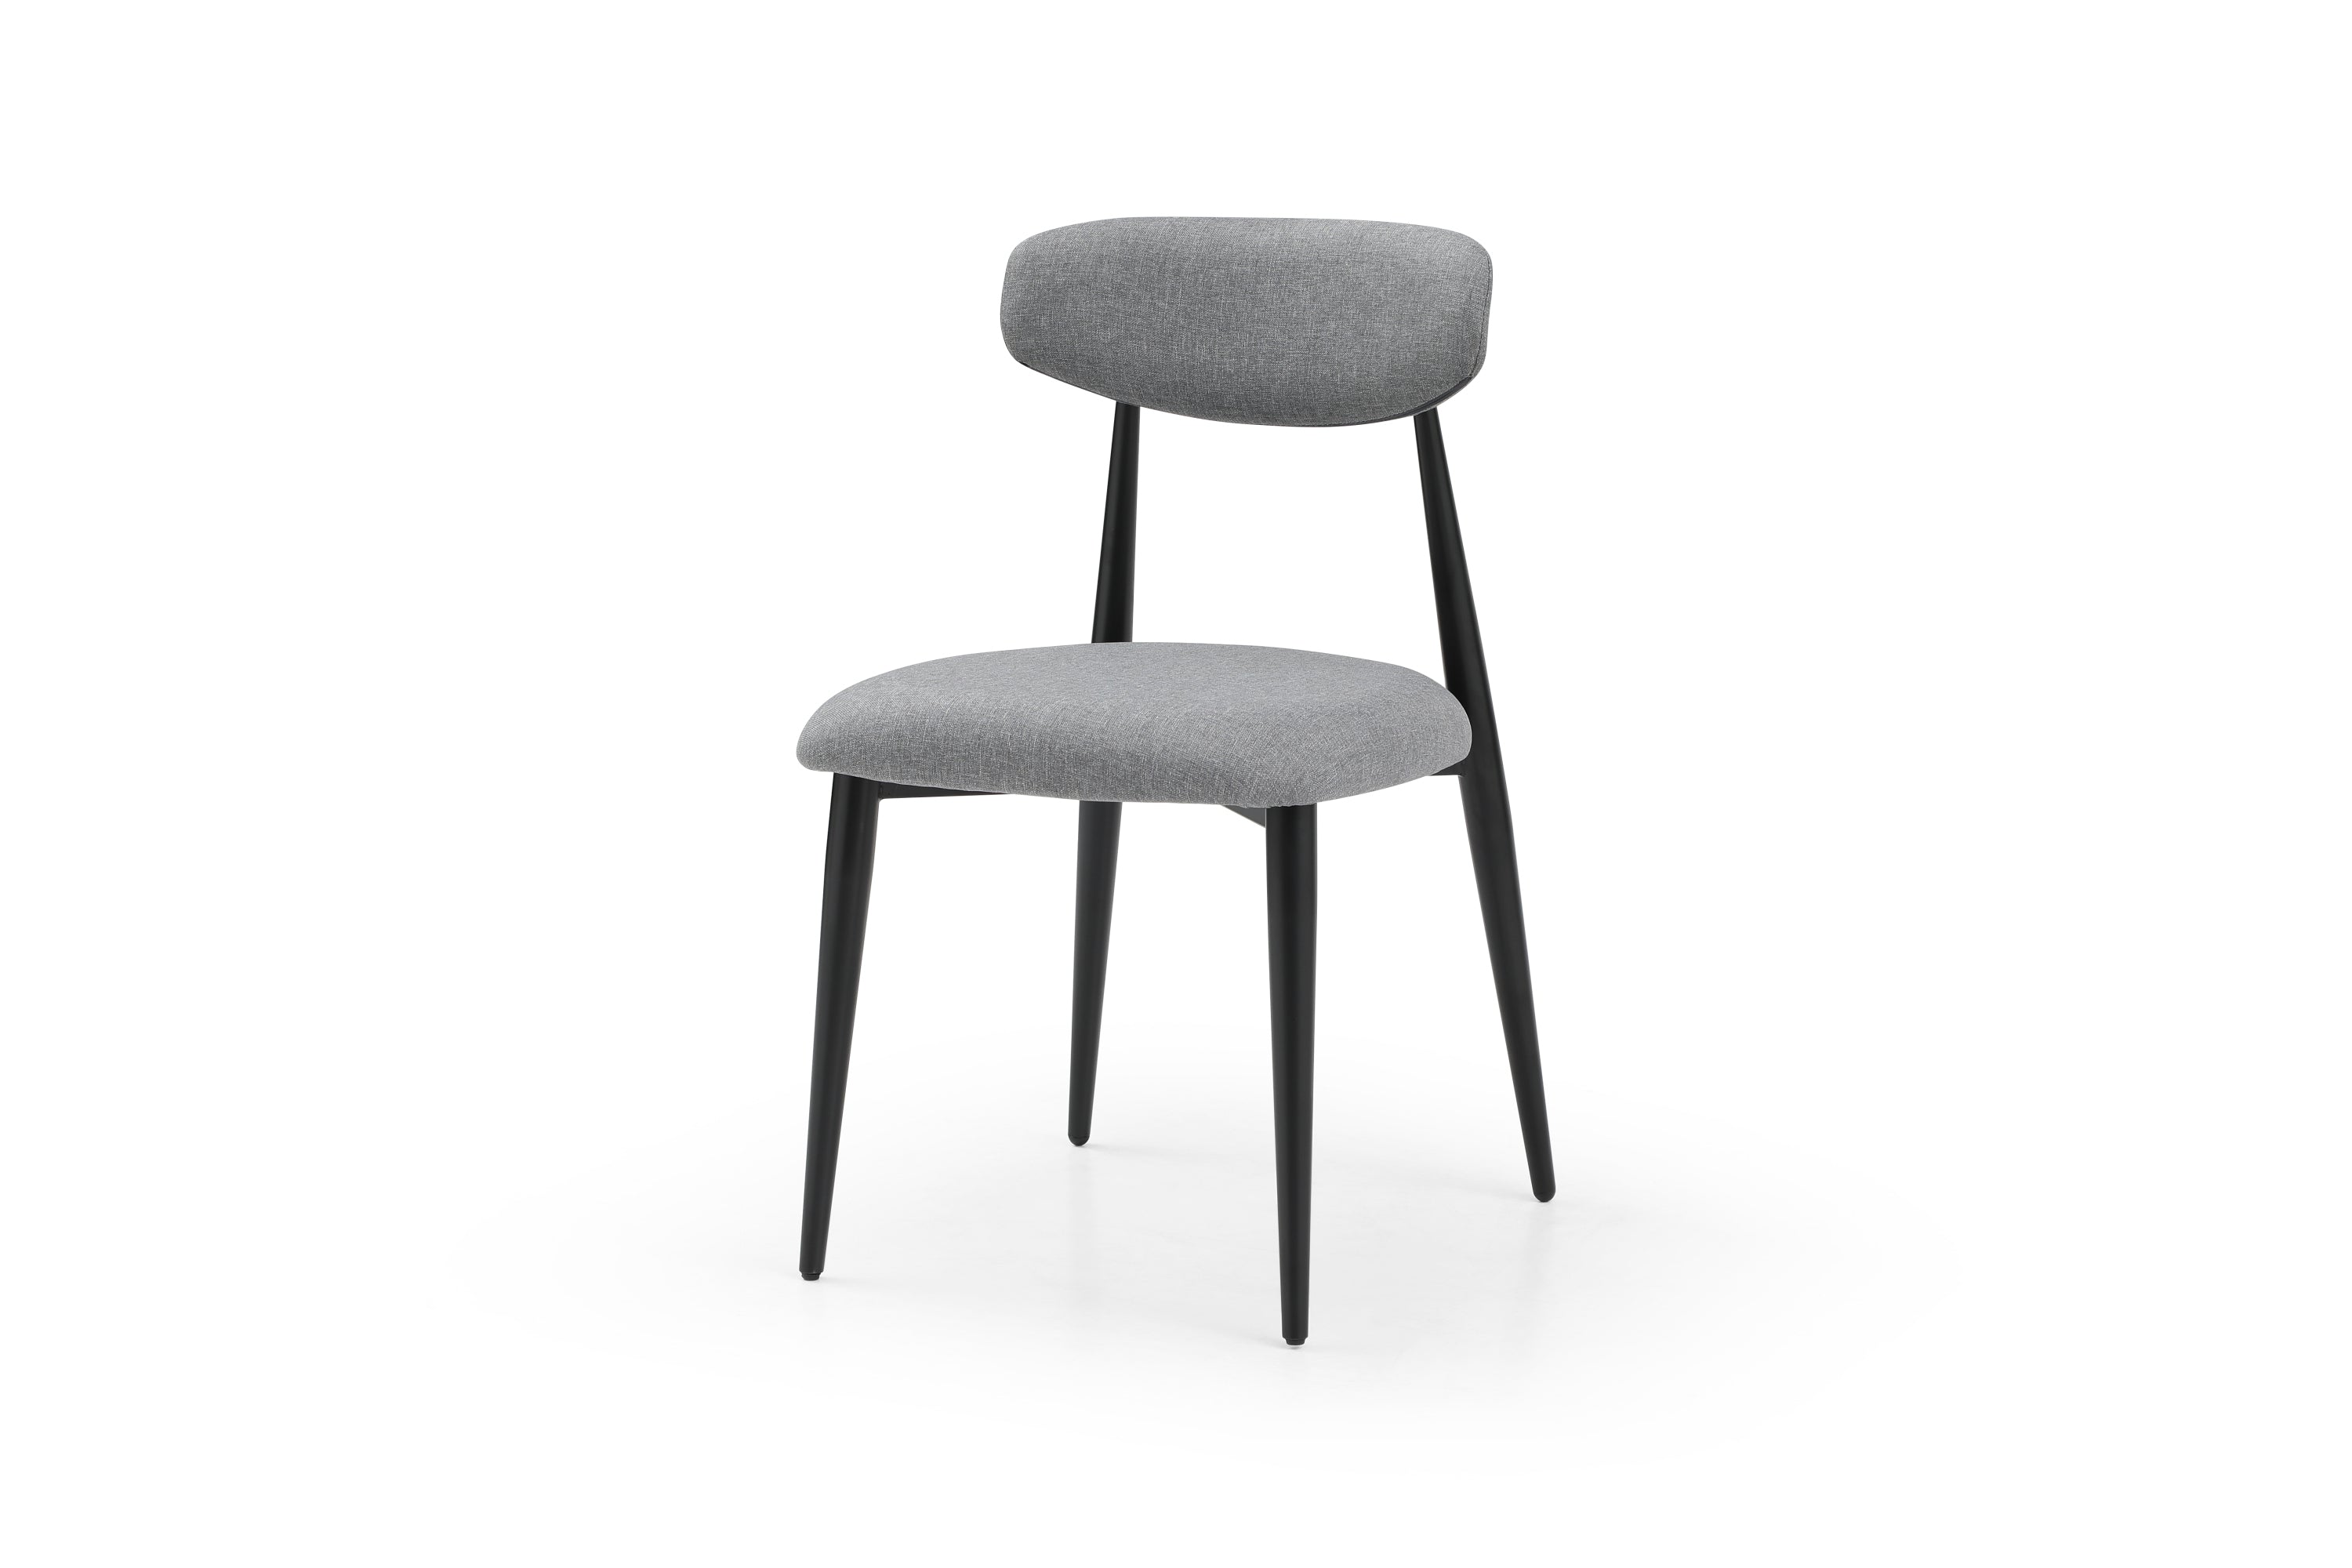 Modern Dining Chairs Curved Backrest Round (Set of 4) - Grey